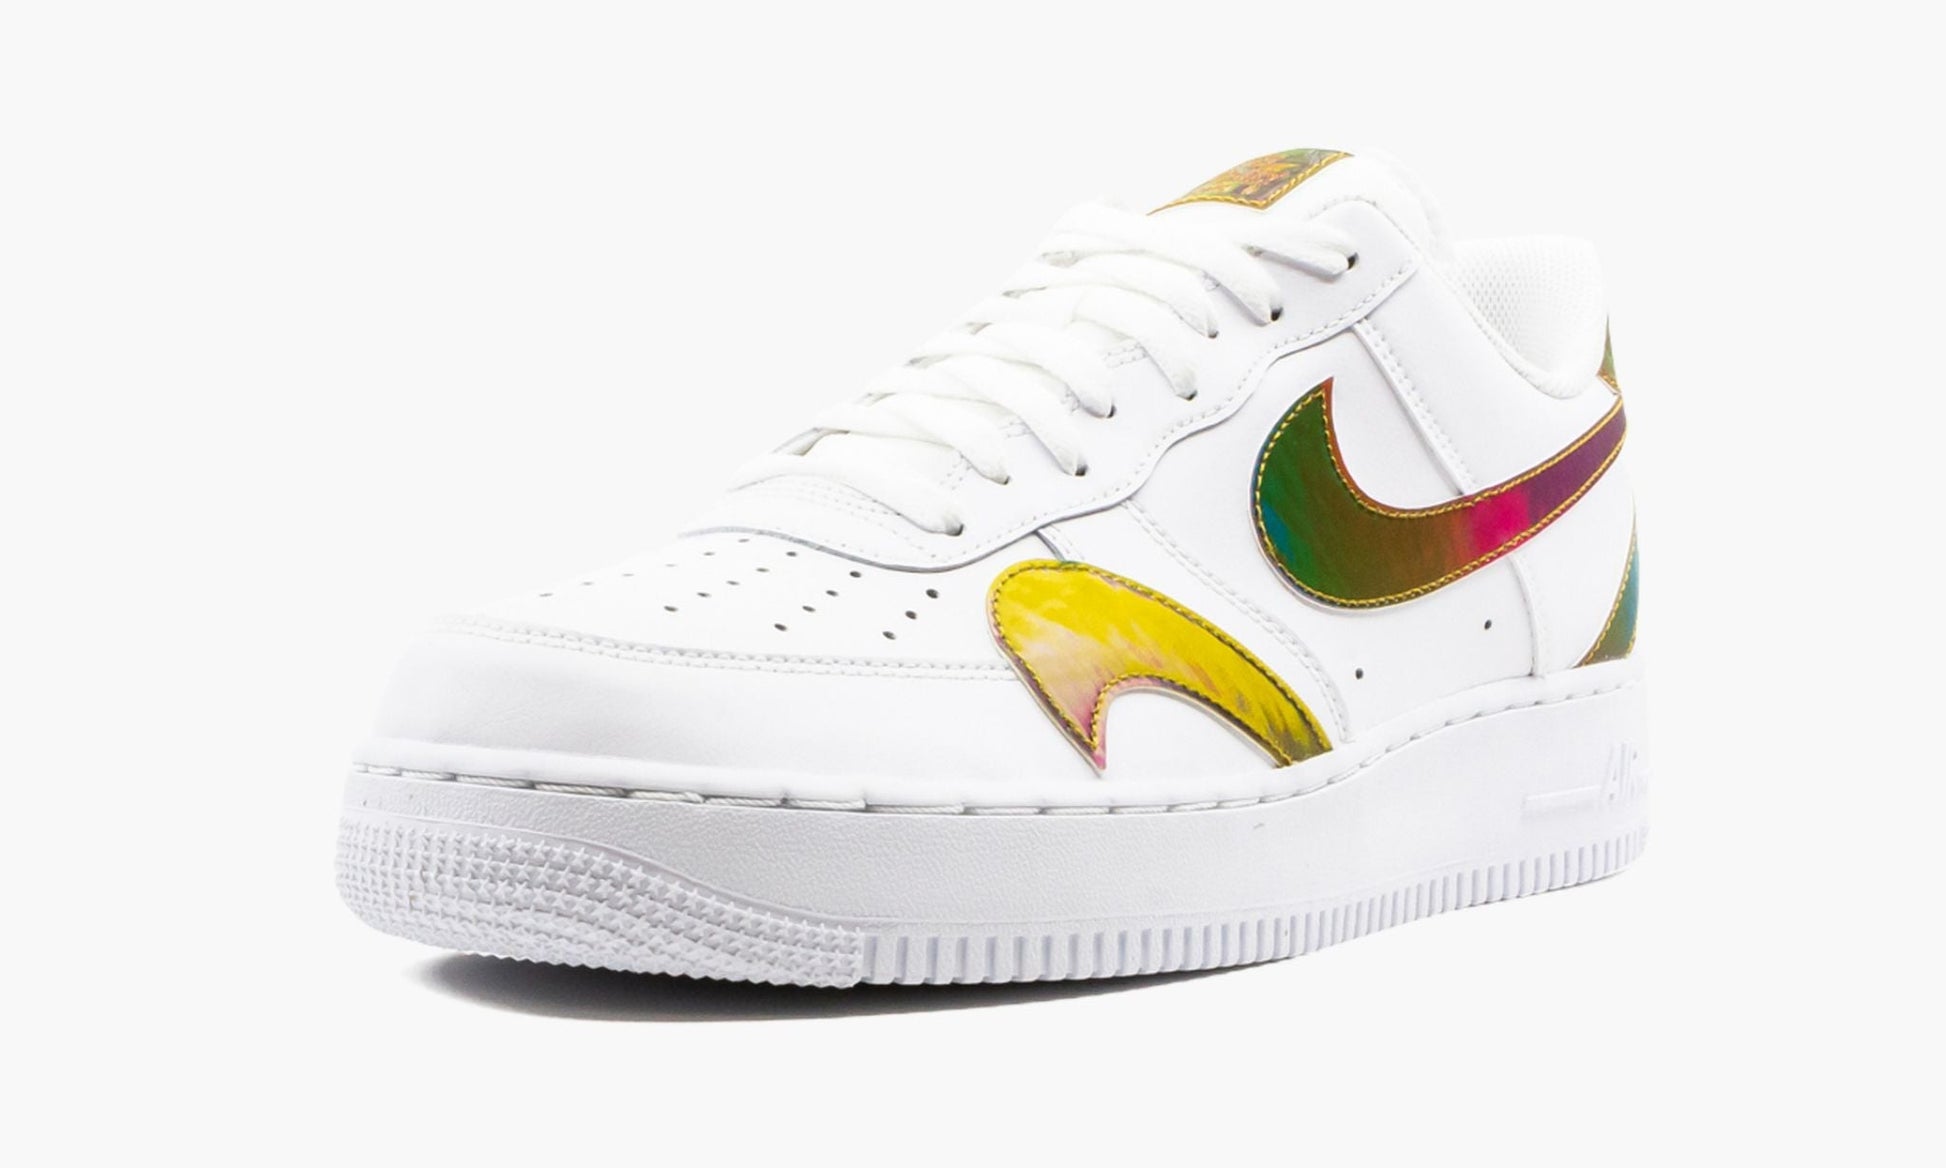 Air Force 1 '07 LV8 "Misplaced Swoosh"